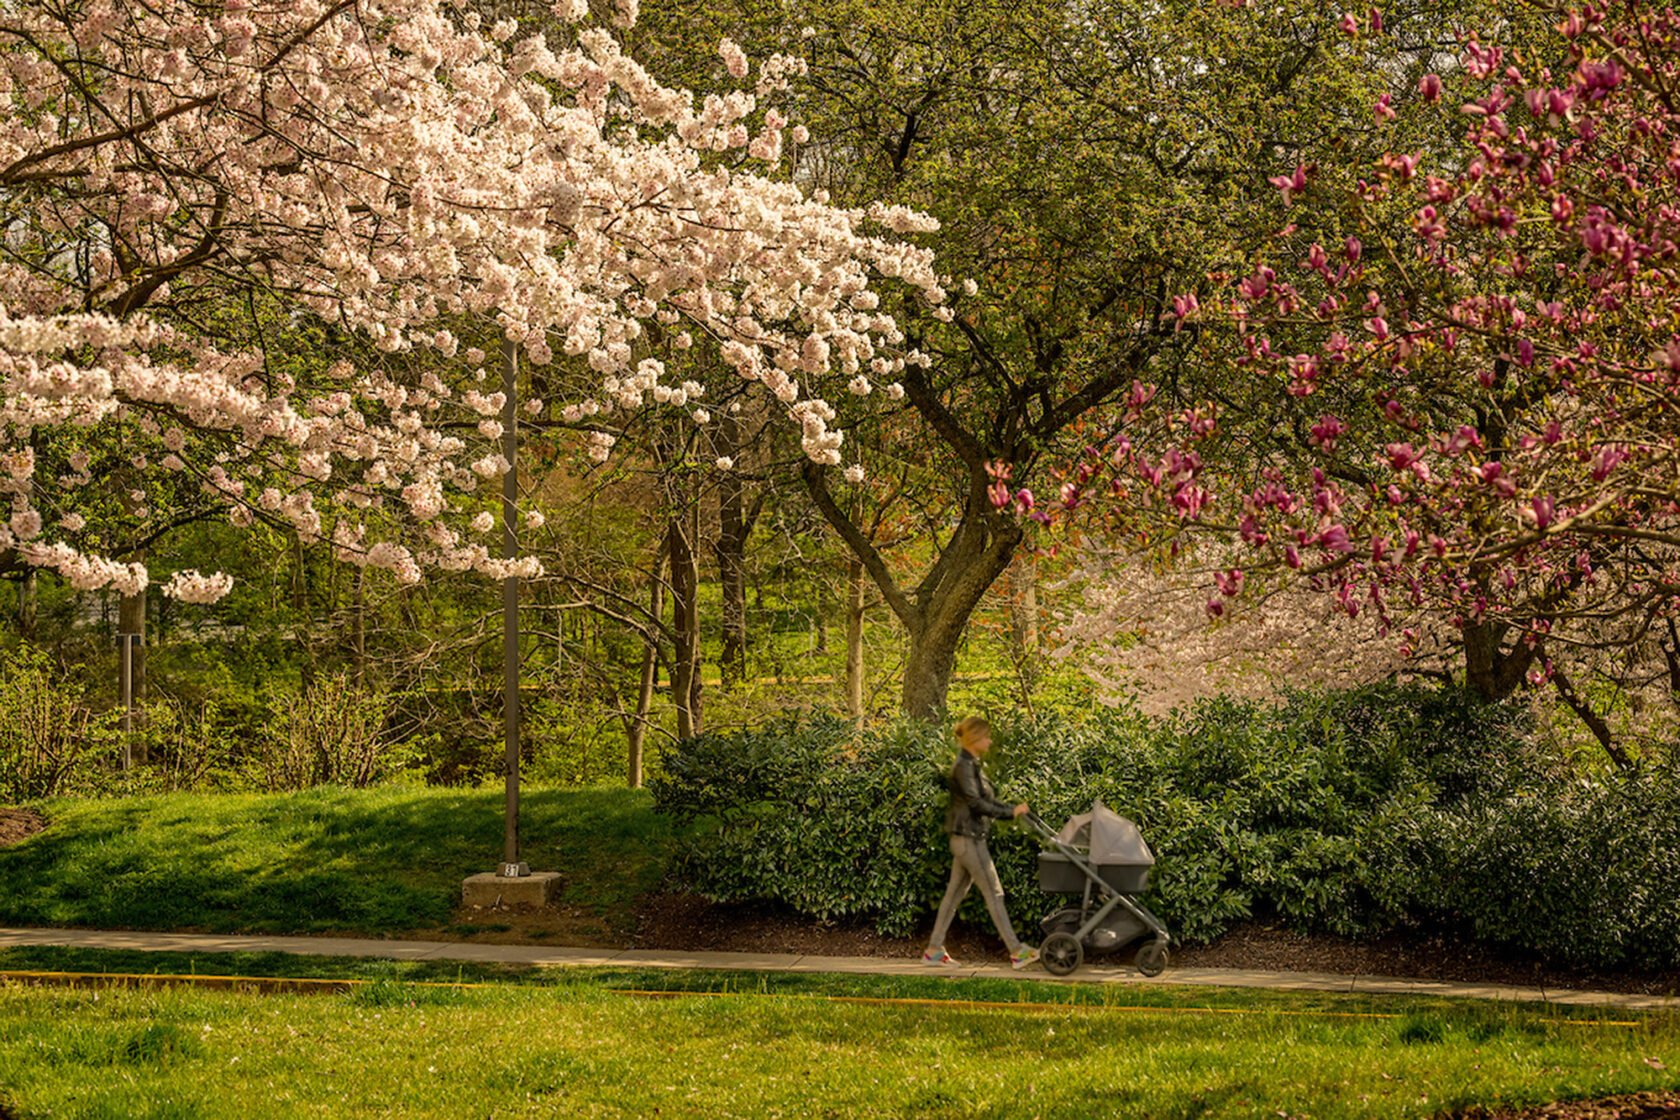 A woman pushing a stroller along a path lined with blooming cherry and magnolia trees.